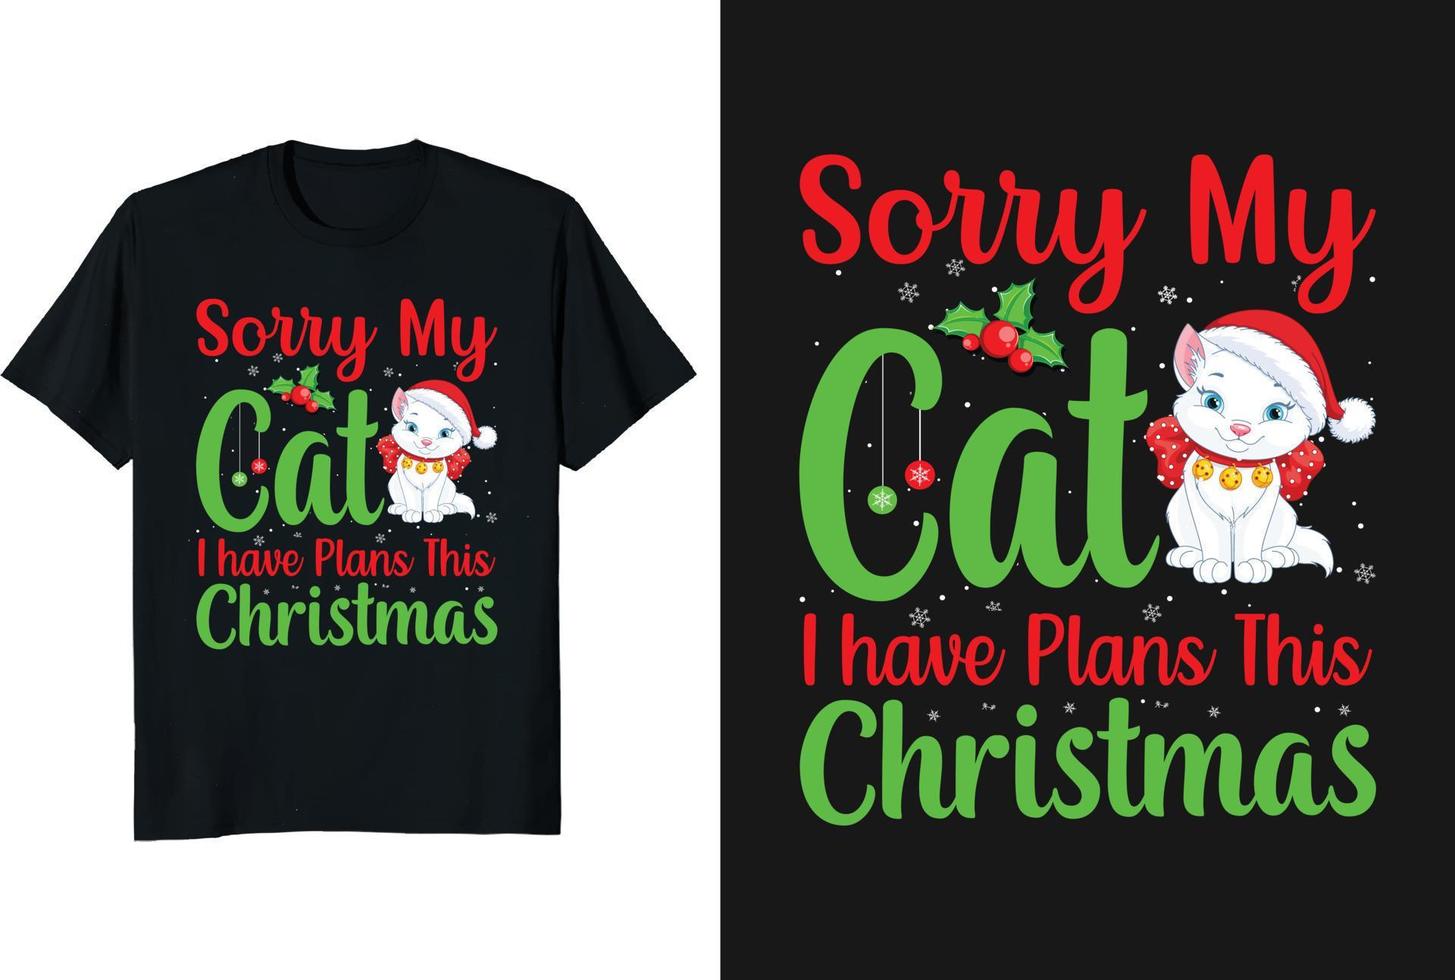 Sorry, my cat I have plans for this Christmas t-shirt design. Christmas typography vector design. ugly t shirt design